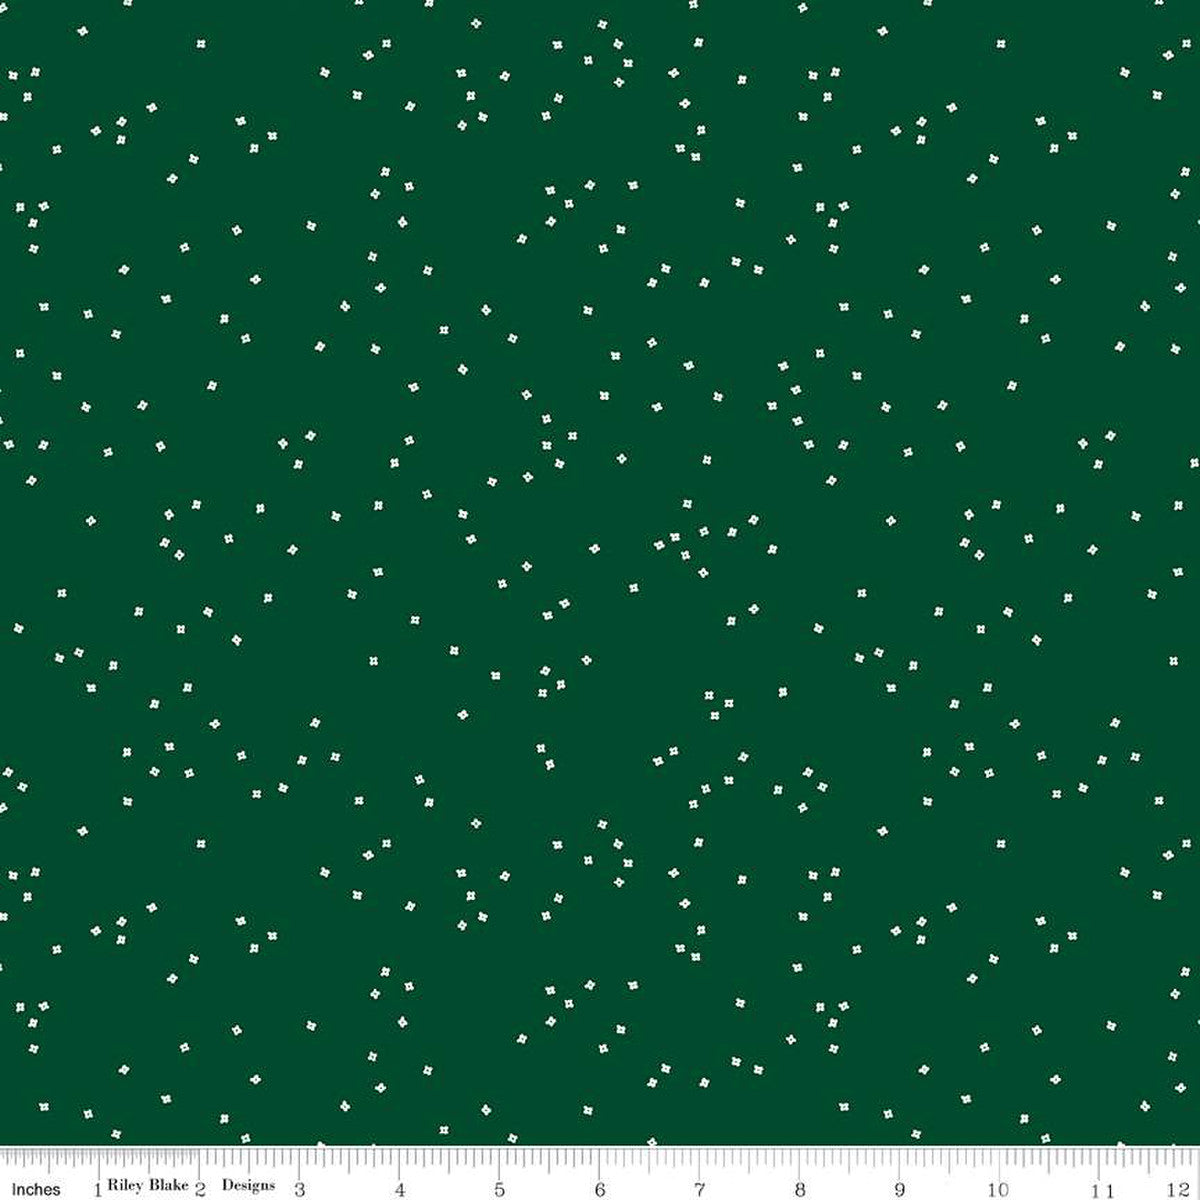 Riley Blake Designs Christopher Thompson  basics blossom small white flowers non-directional scattered on Christmas green background quilt cotton